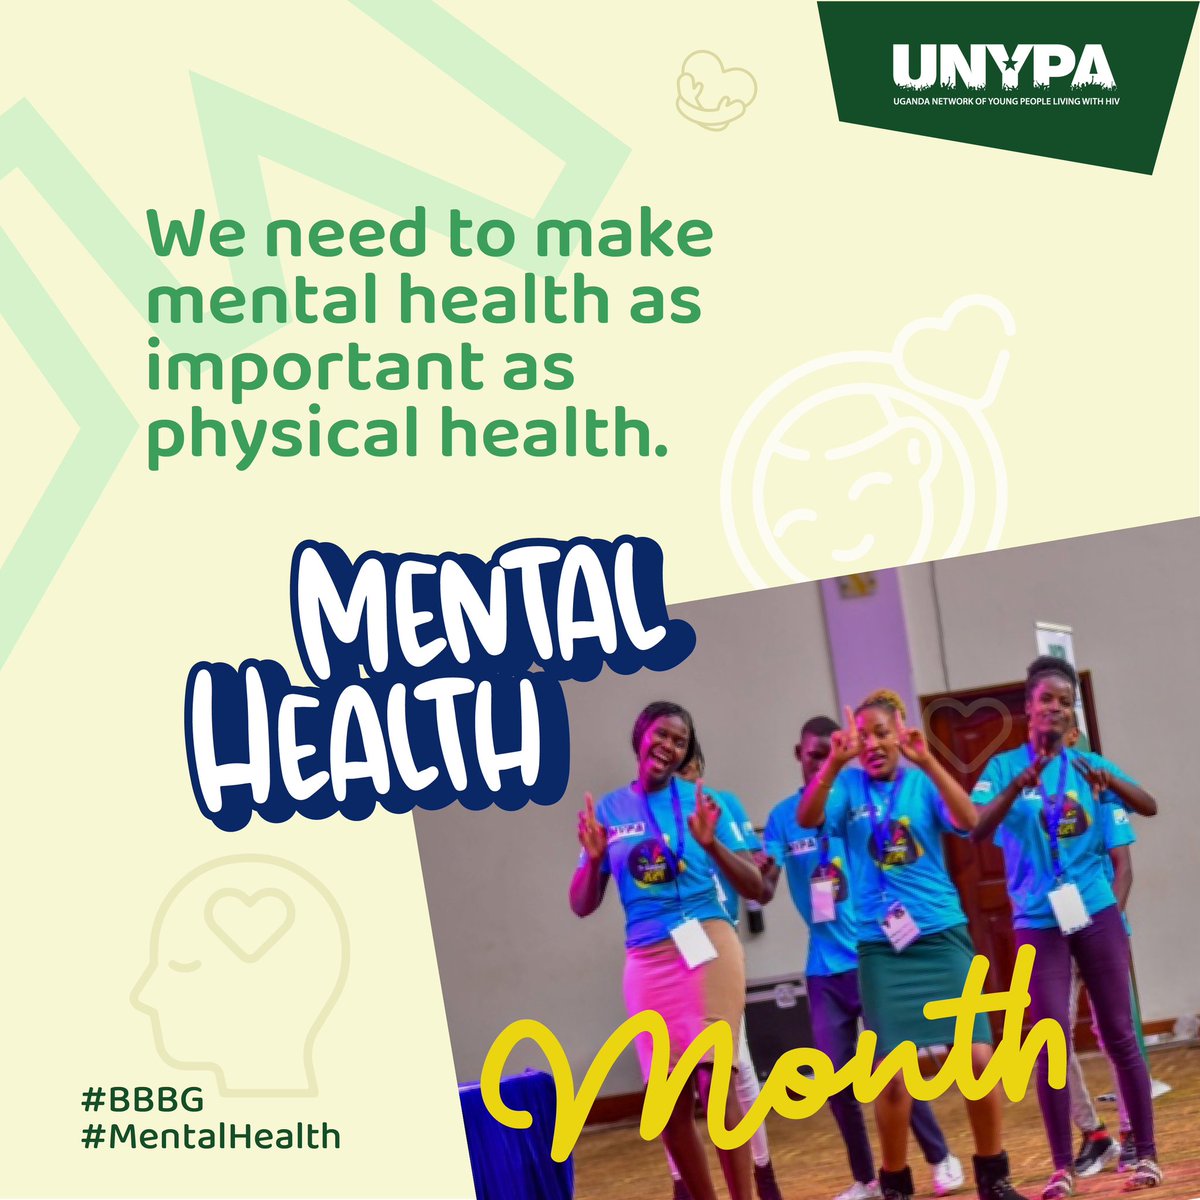 Giving mental health the same importance as physical health, we can create a healthier, more resilient society. #BBBG #MentalHealth